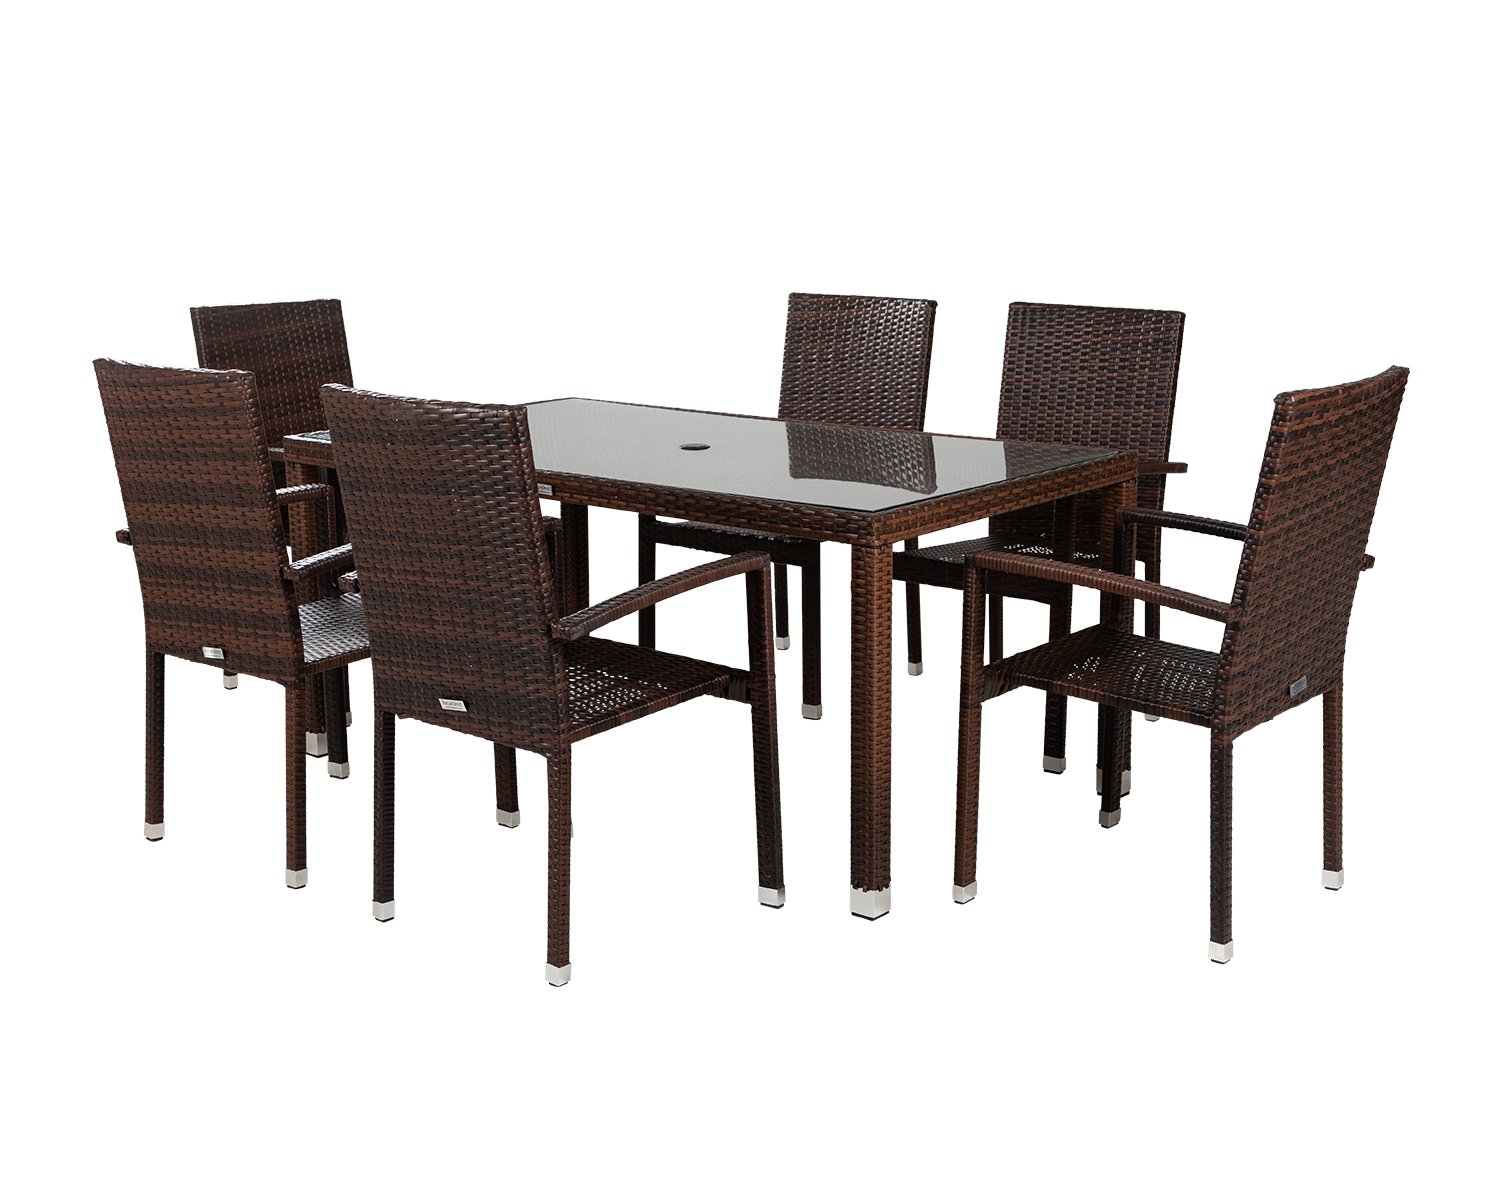 6 Seat Rattan Garden Dining Set With Rectangular Table In Brown Rio Rattan Direct